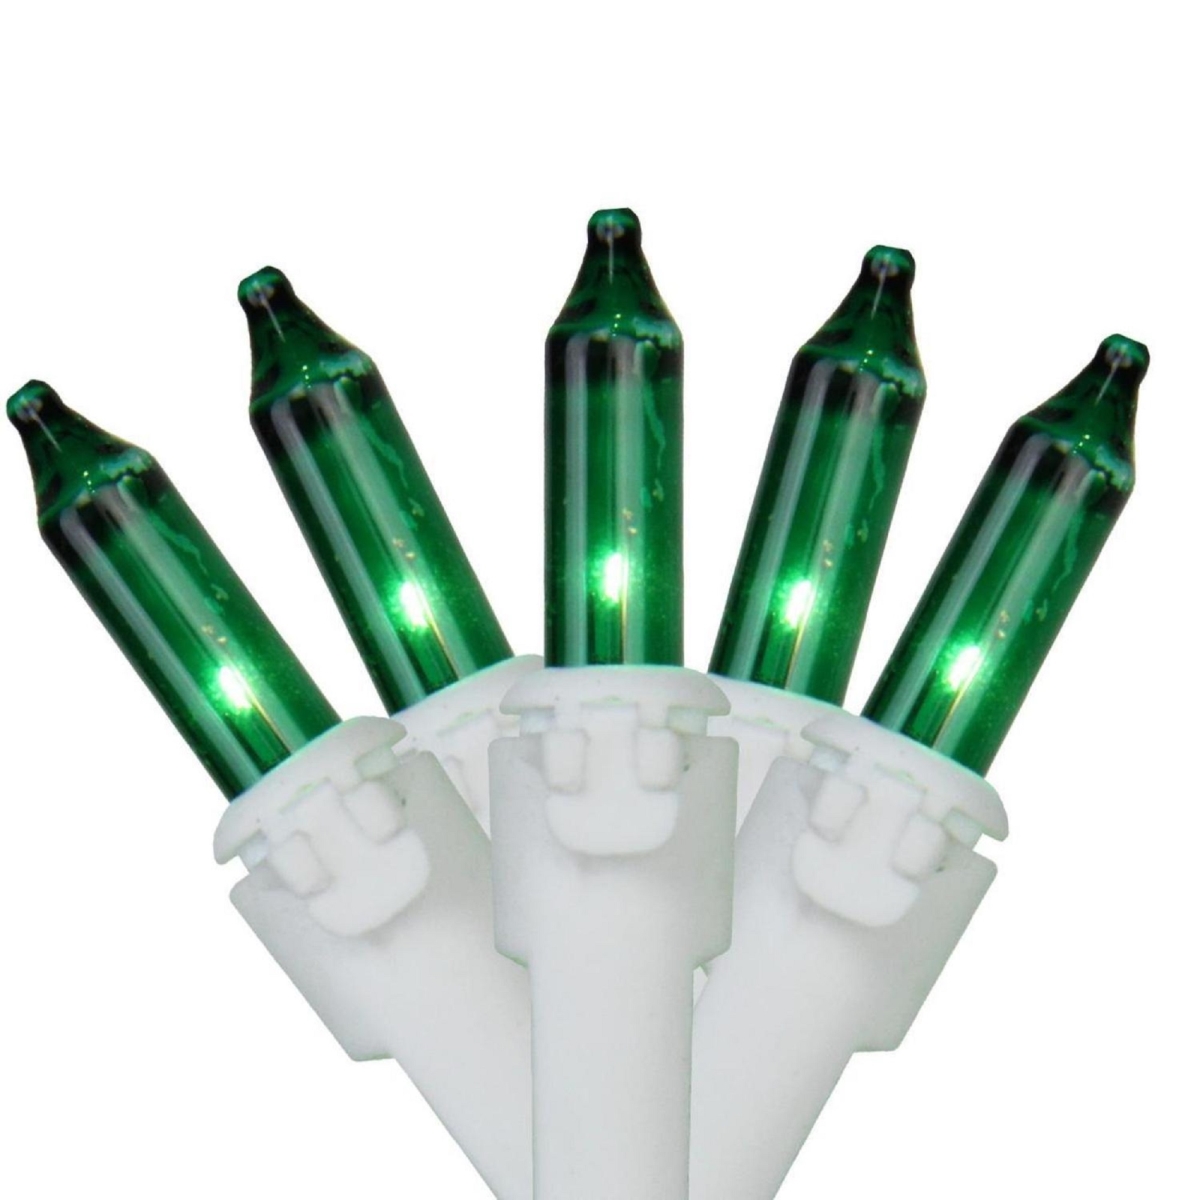 Picture of Brite Star 32635048 24.6 ft. White Wire Green Mini Christmas Light Set - 50 Count